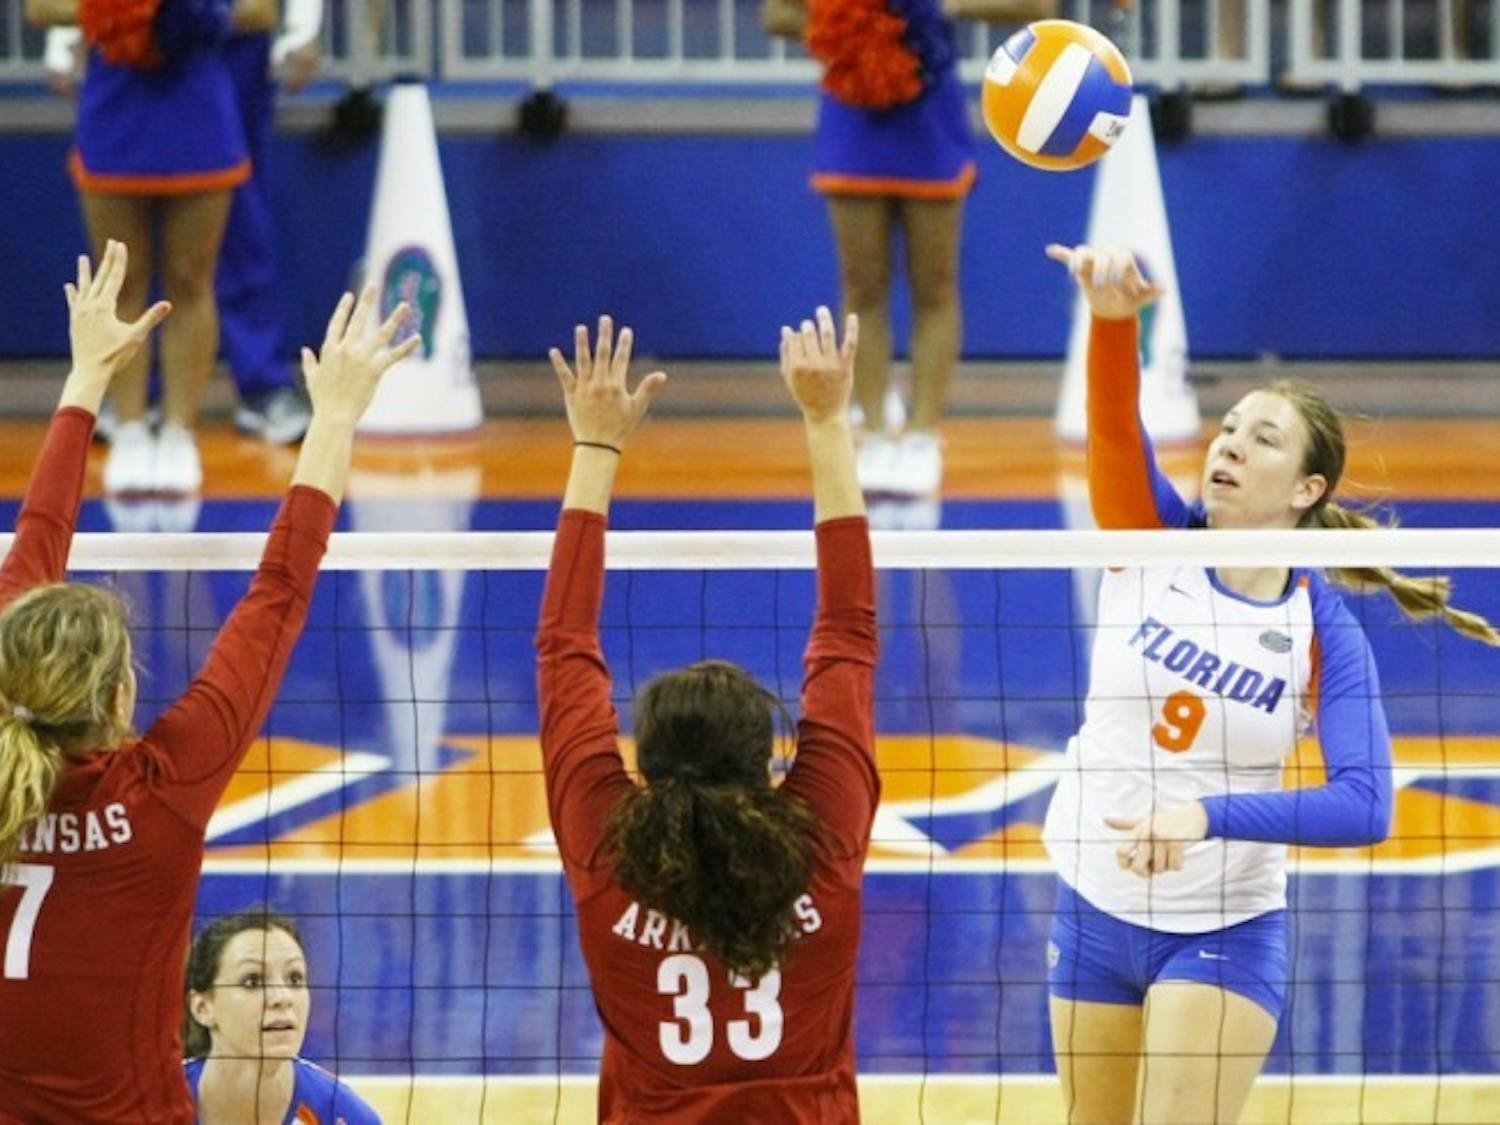 Outside hitter Ziva Recek attempts to hit the ball over the net in Florida's 3-0 win on Friday in the Stephen C. O'Connell Center. Recek led UF with 19 kills against the Razorbacks.